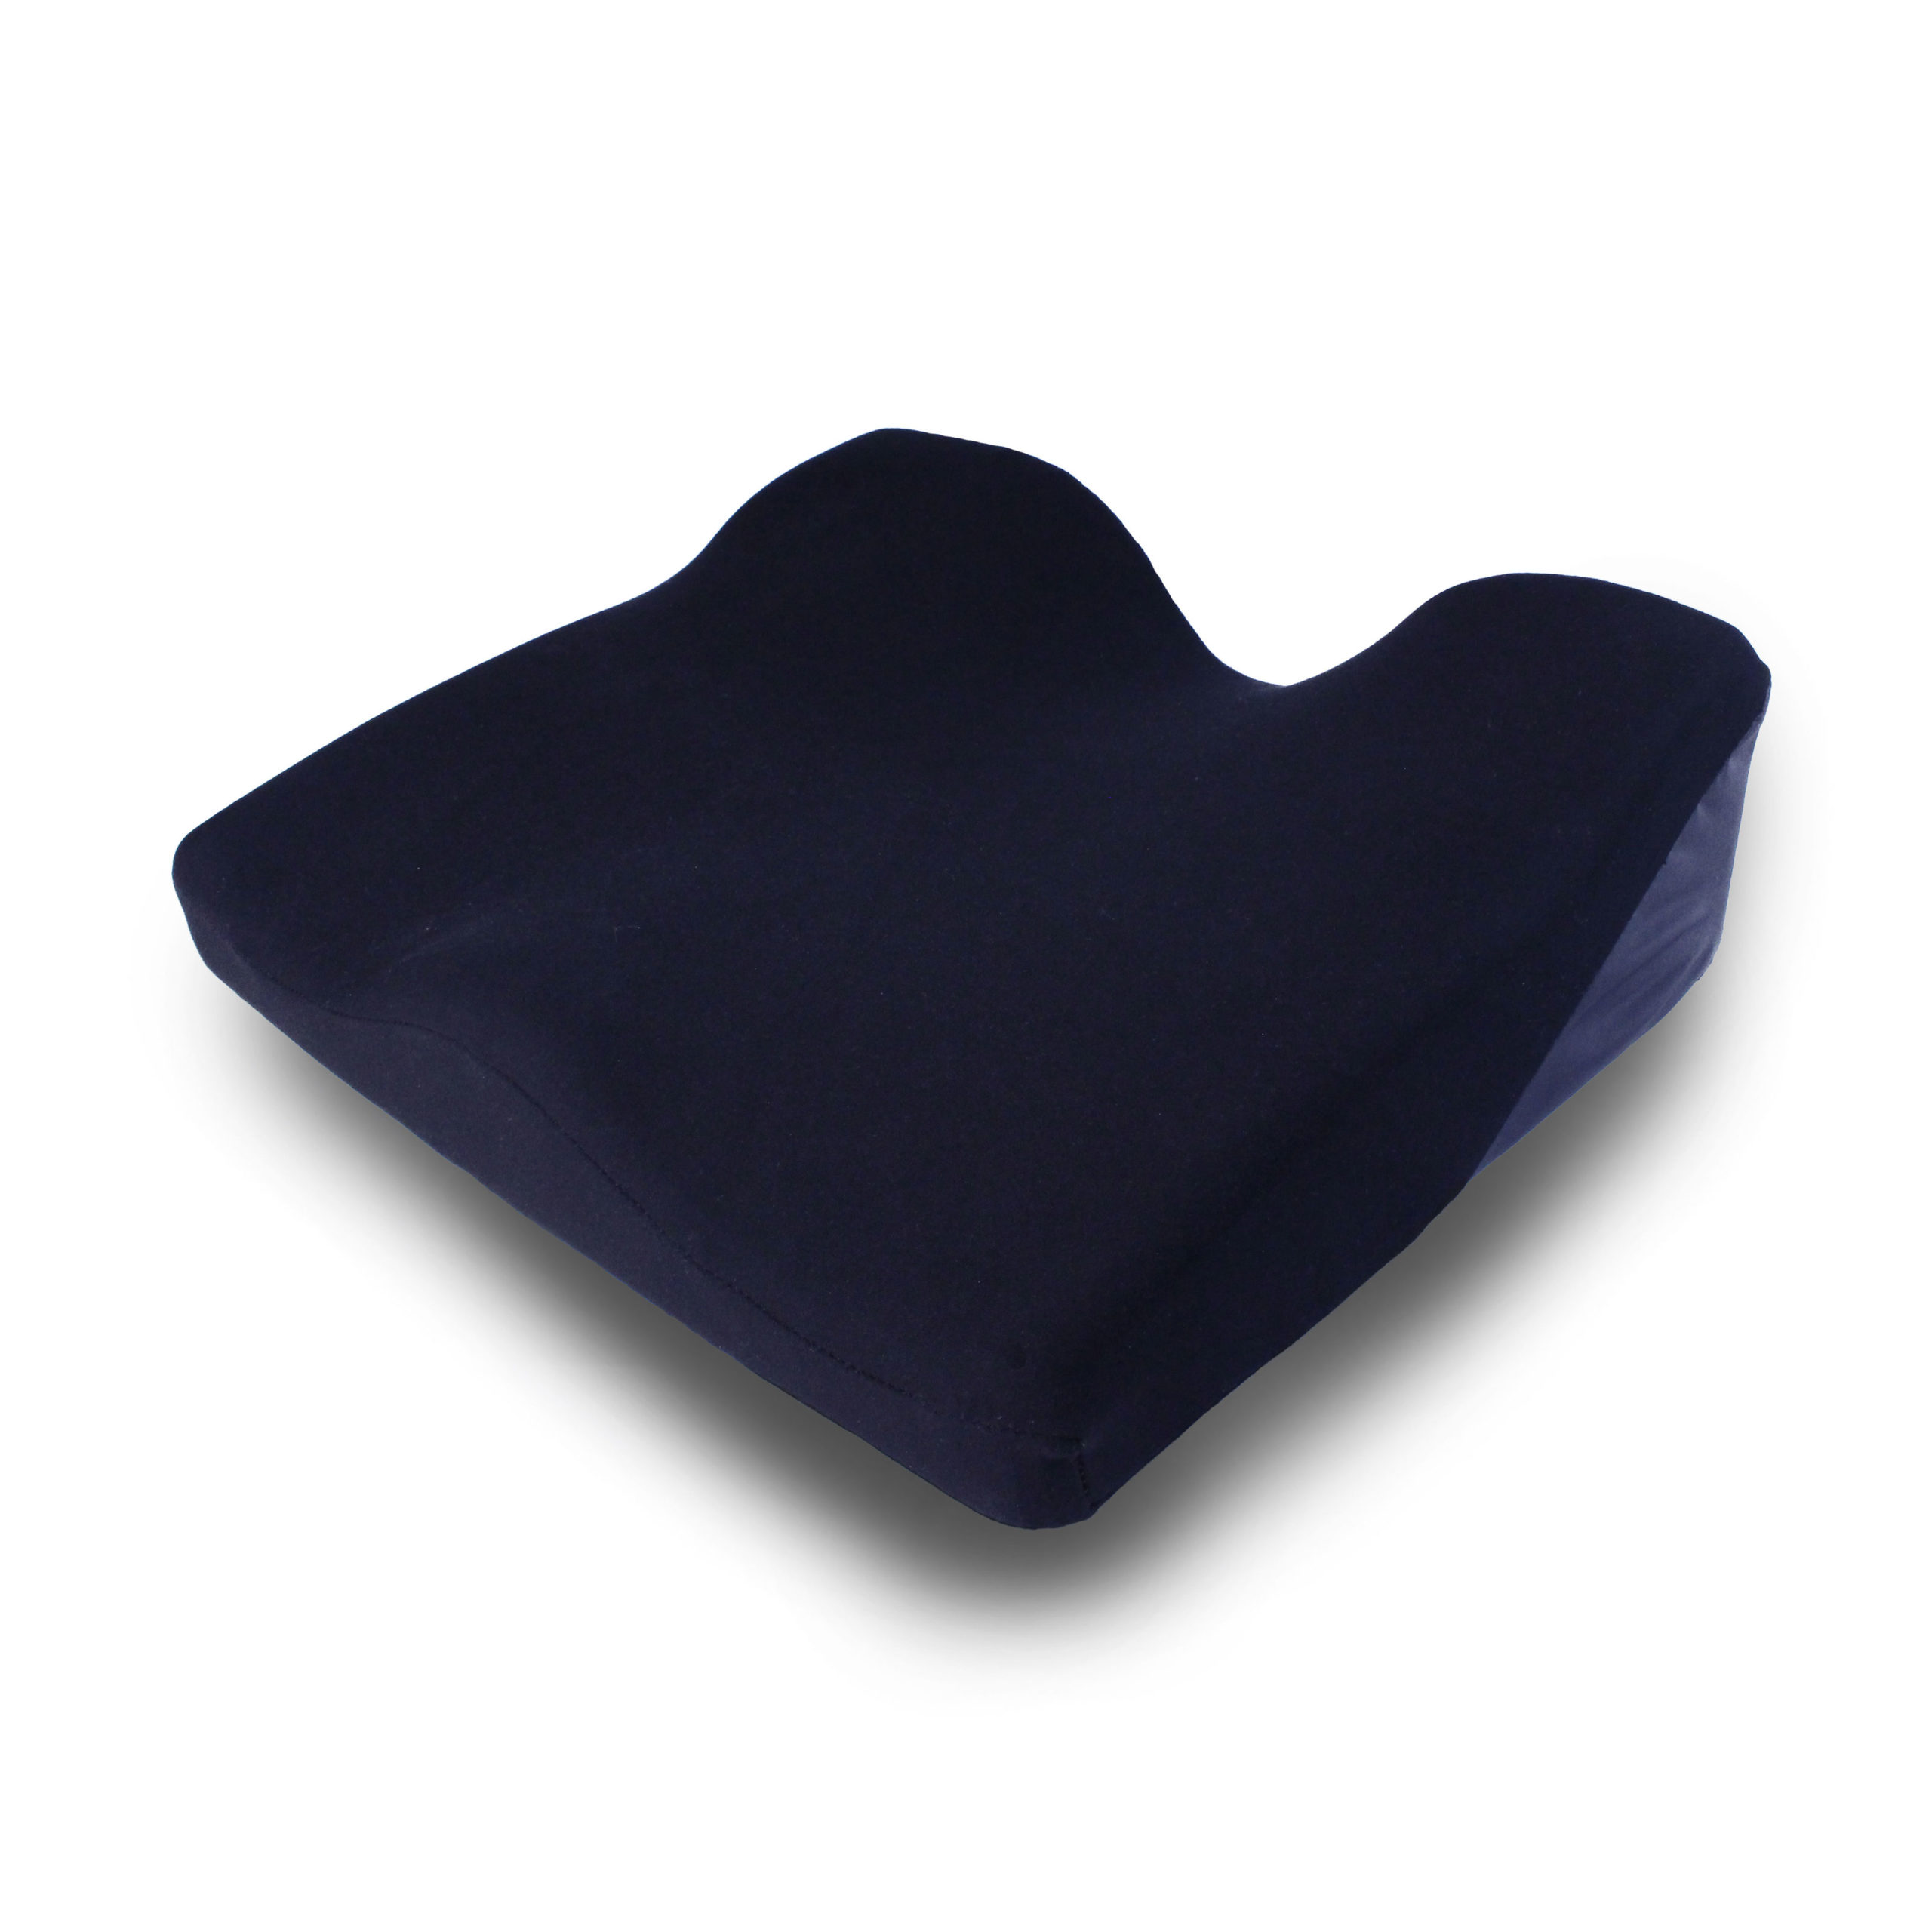 D-Contour Molded Pressure Relief Cushion with Elastic Cover by DDO –  Diversability Development Organization (DDO)